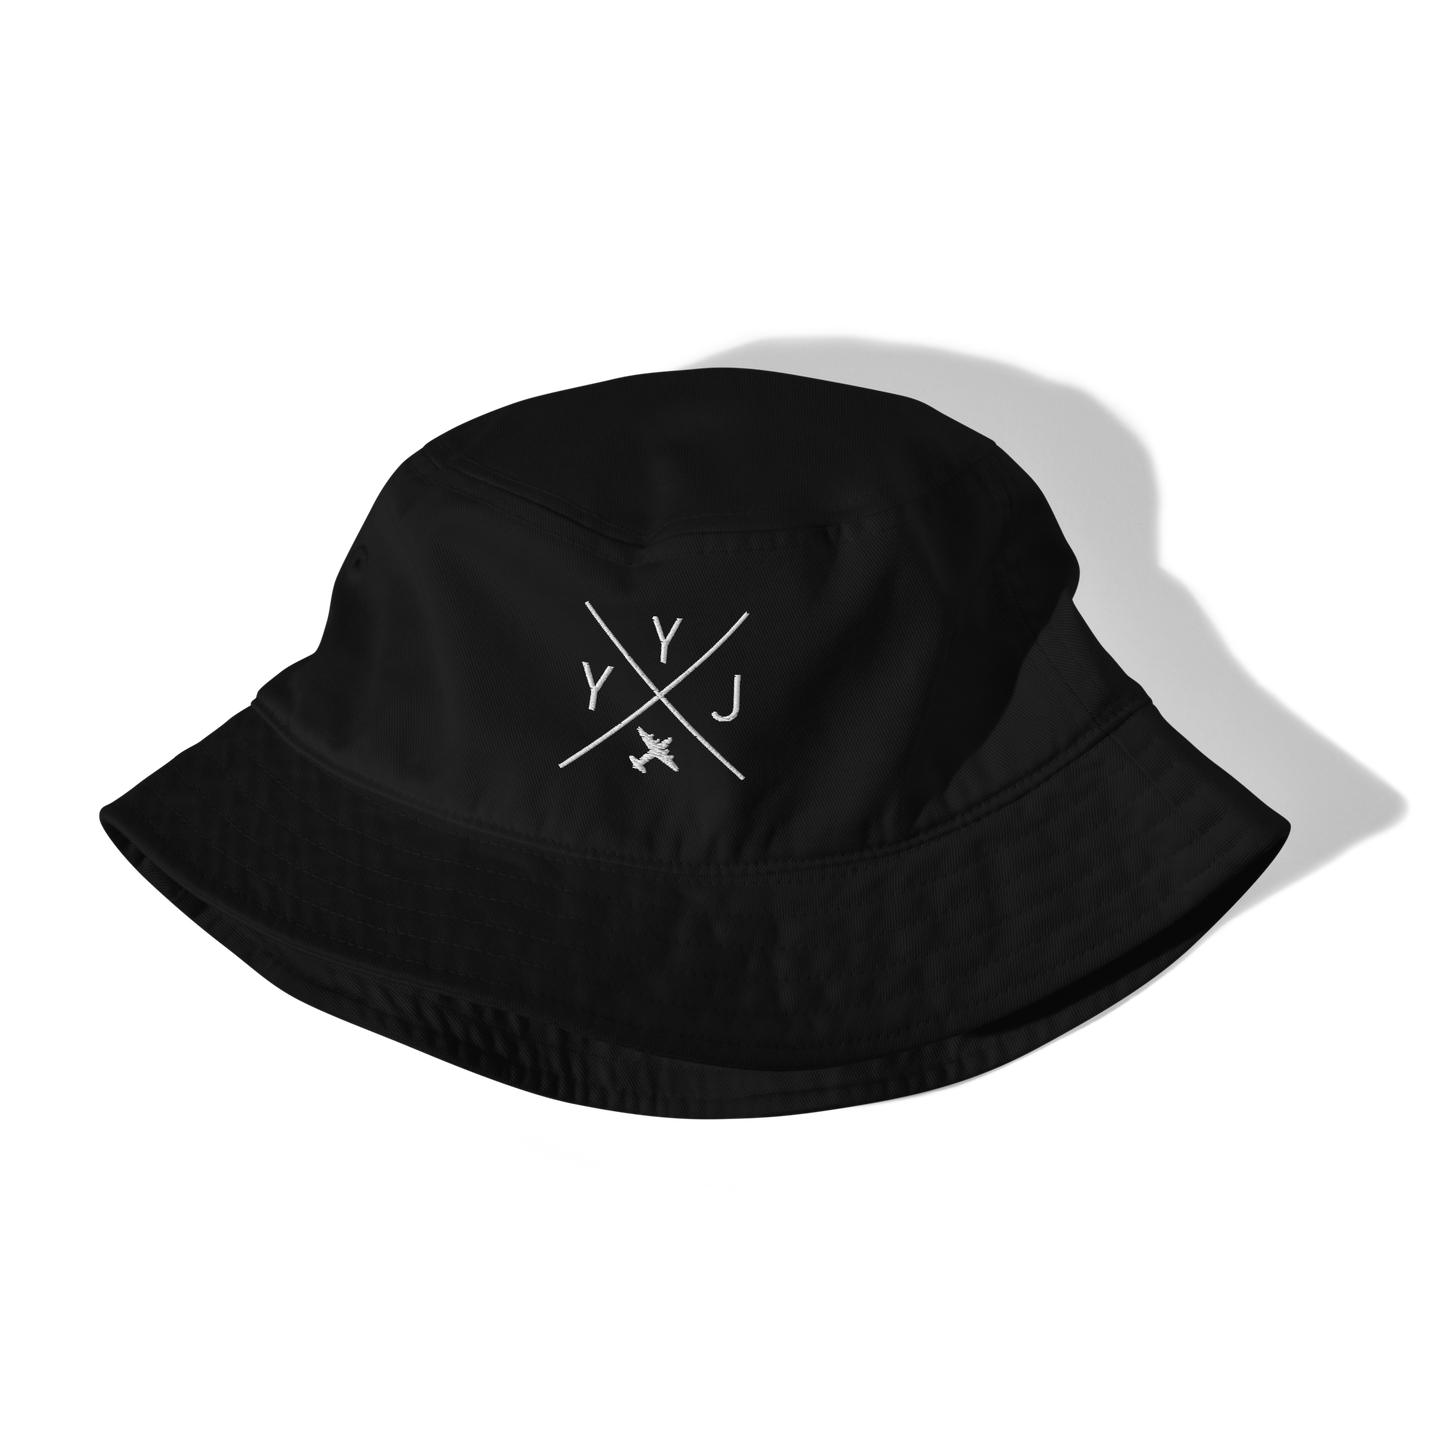 YHM Designs - YYJ Victoria Organic Cotton Bucket Hat - Crossed-X Design with Airport Code and Vintage Propliner - White Embroidery - Image 02